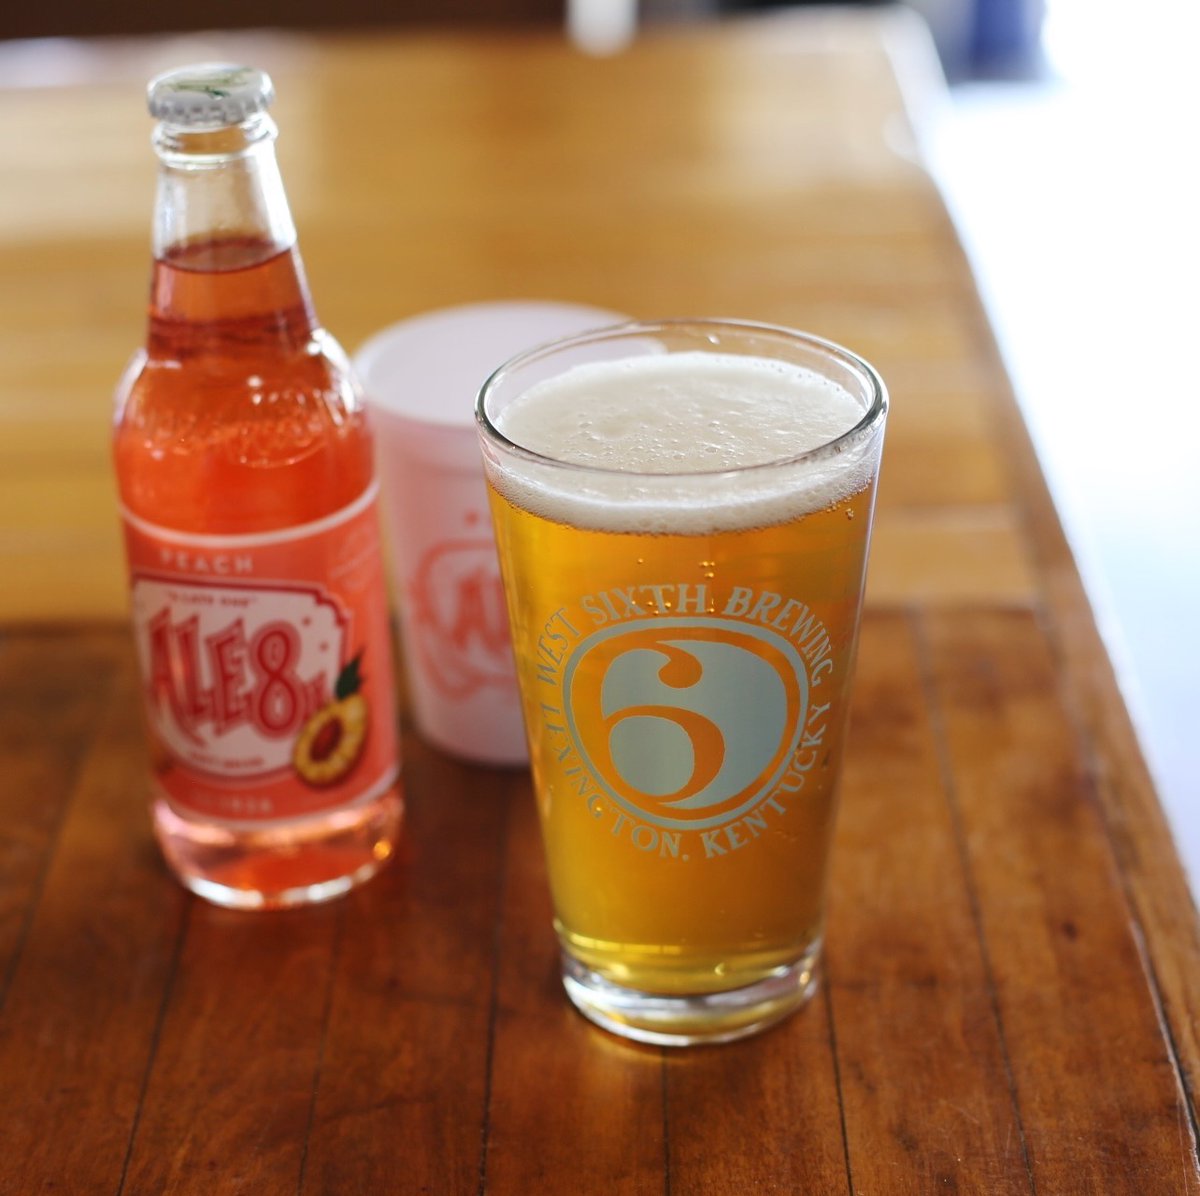 Peach Ale-8 Preview! 🍑✨ Snag free samples & cups to keep from our friends at ale8one 👀 First sips Wednesday 3/20 from 5-7! 🍑 psssst...see that beer? That's our French Pilsner. 10/10 would recommend either of these sips for a Spring refresher.